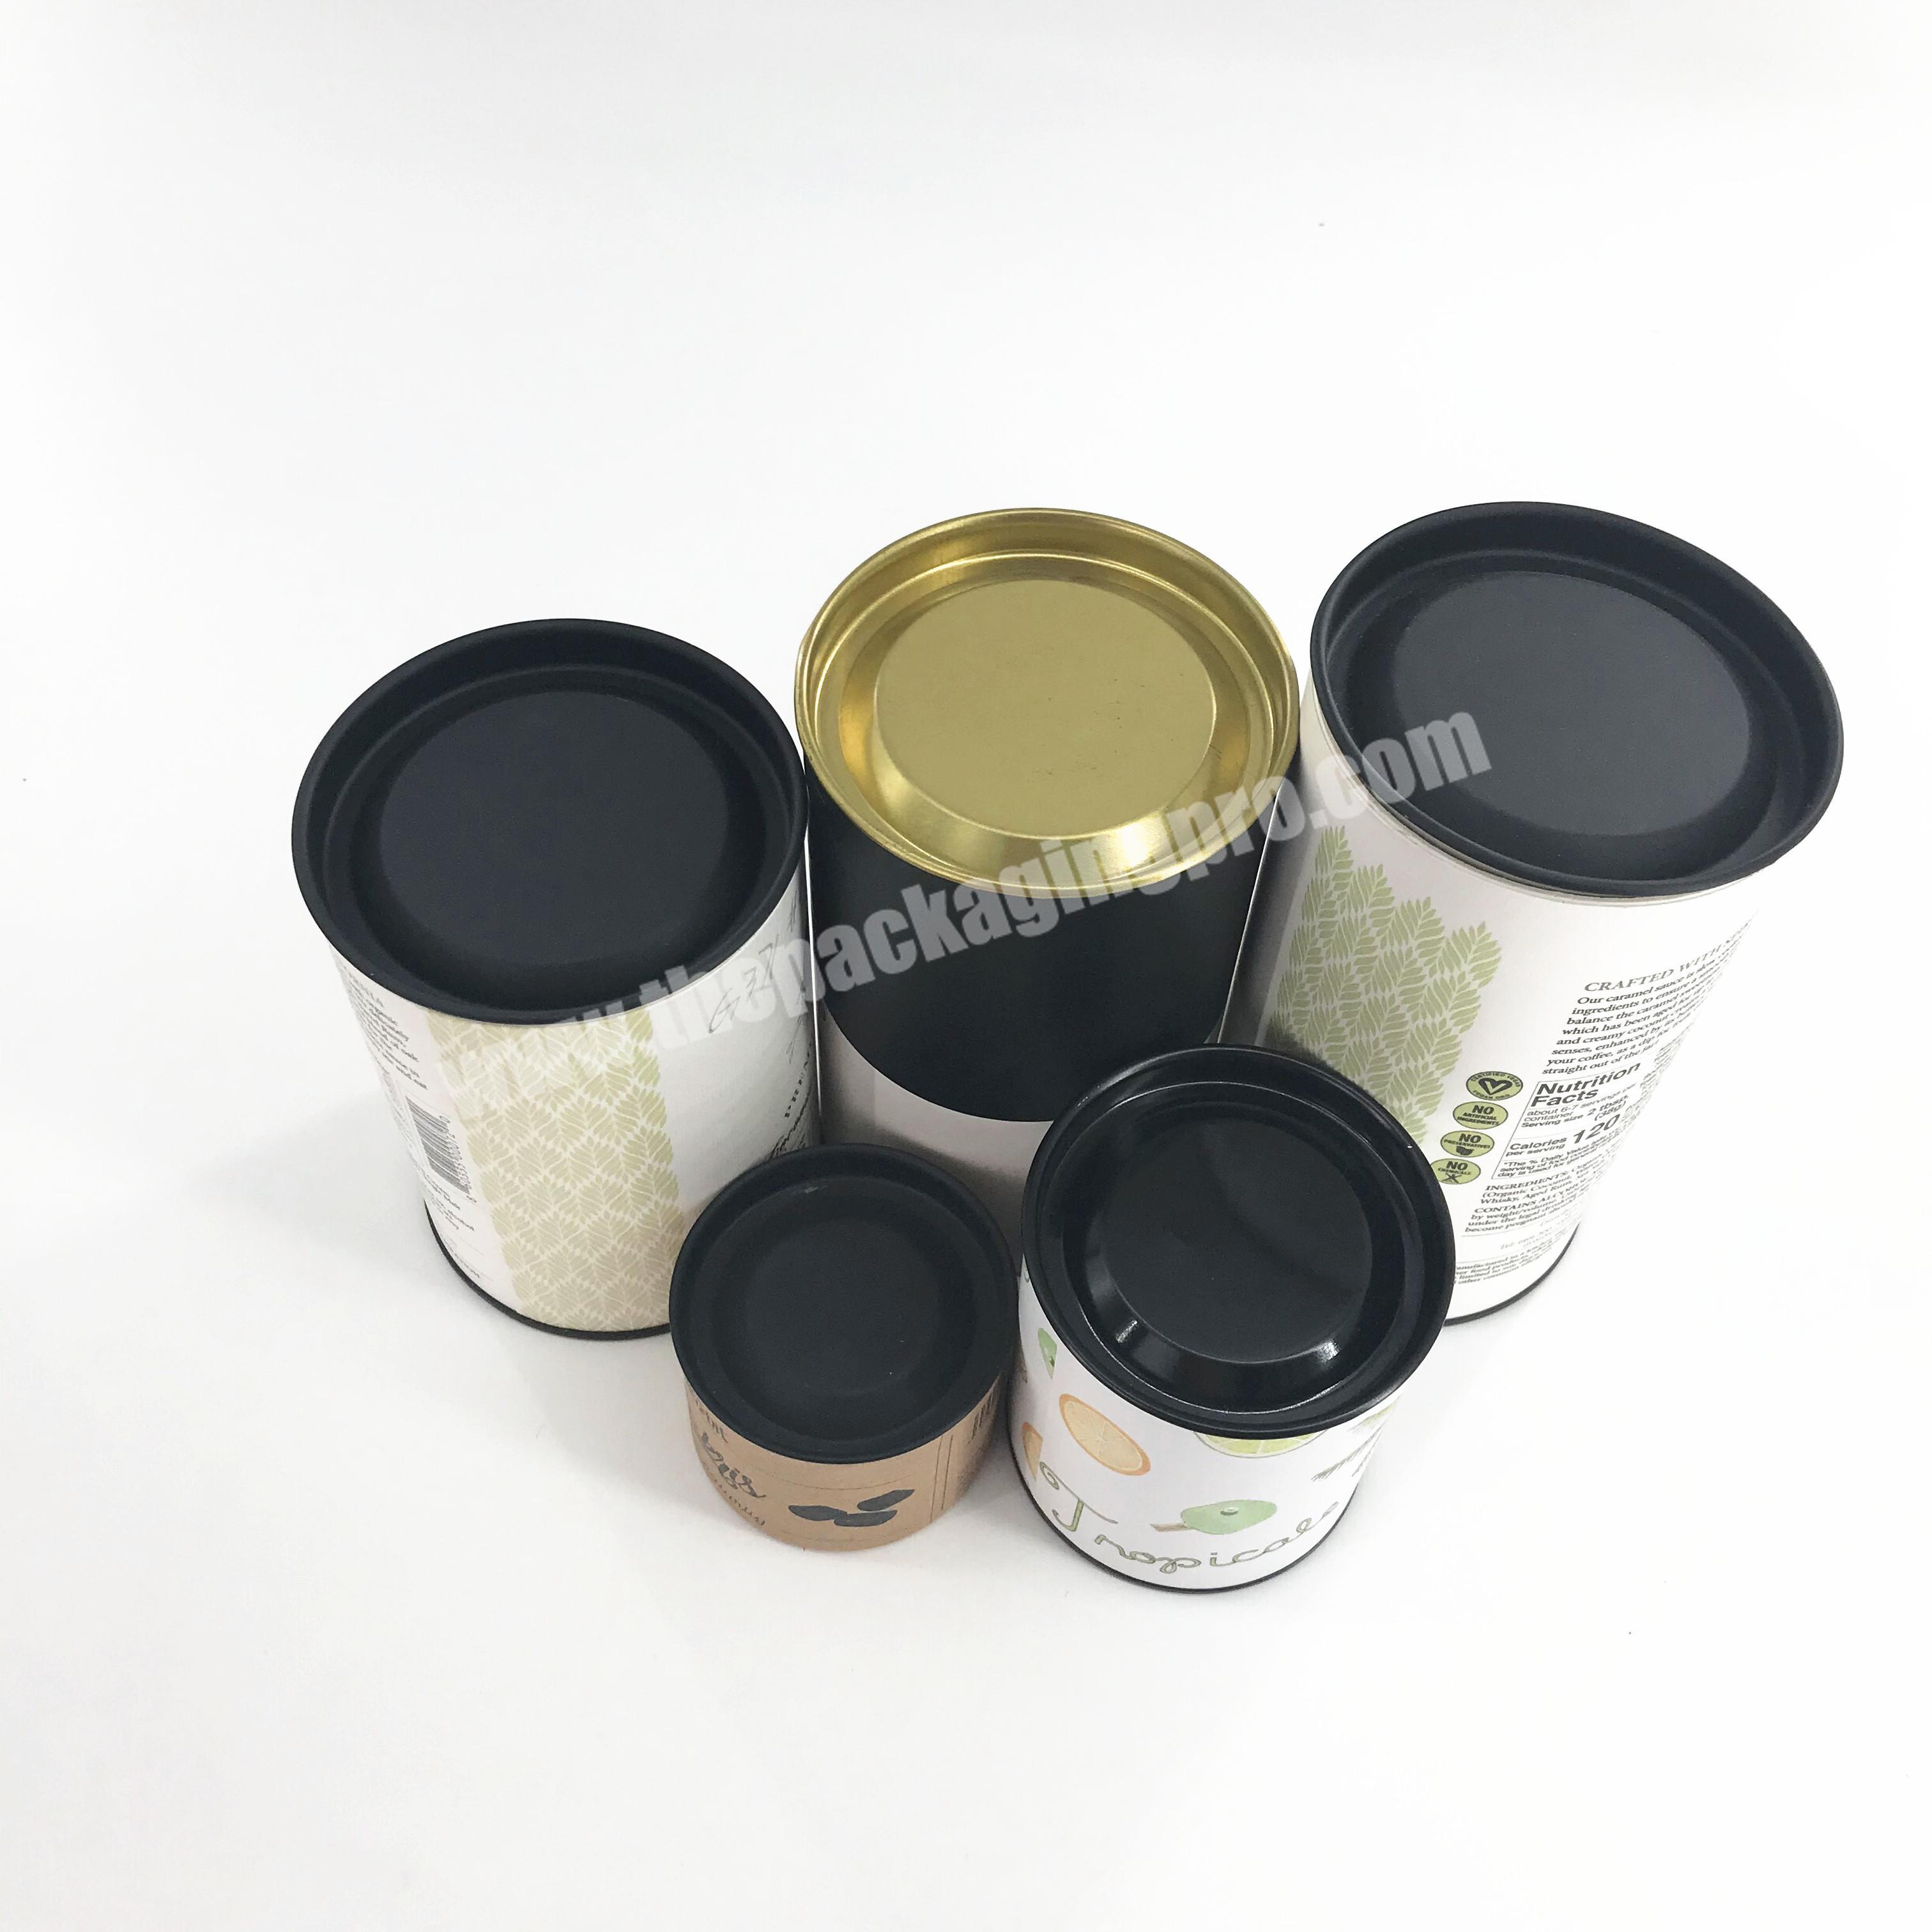 https://thepackagingpro.com/media/goods/images/2022/8/Round-Cylinder-Food-Grade-Cardboard-Boxes-For-Packing-Protein-Powder-Paper-Tube-With-Aluminum-Foiling-Peel-Off-Lid-3.jpg